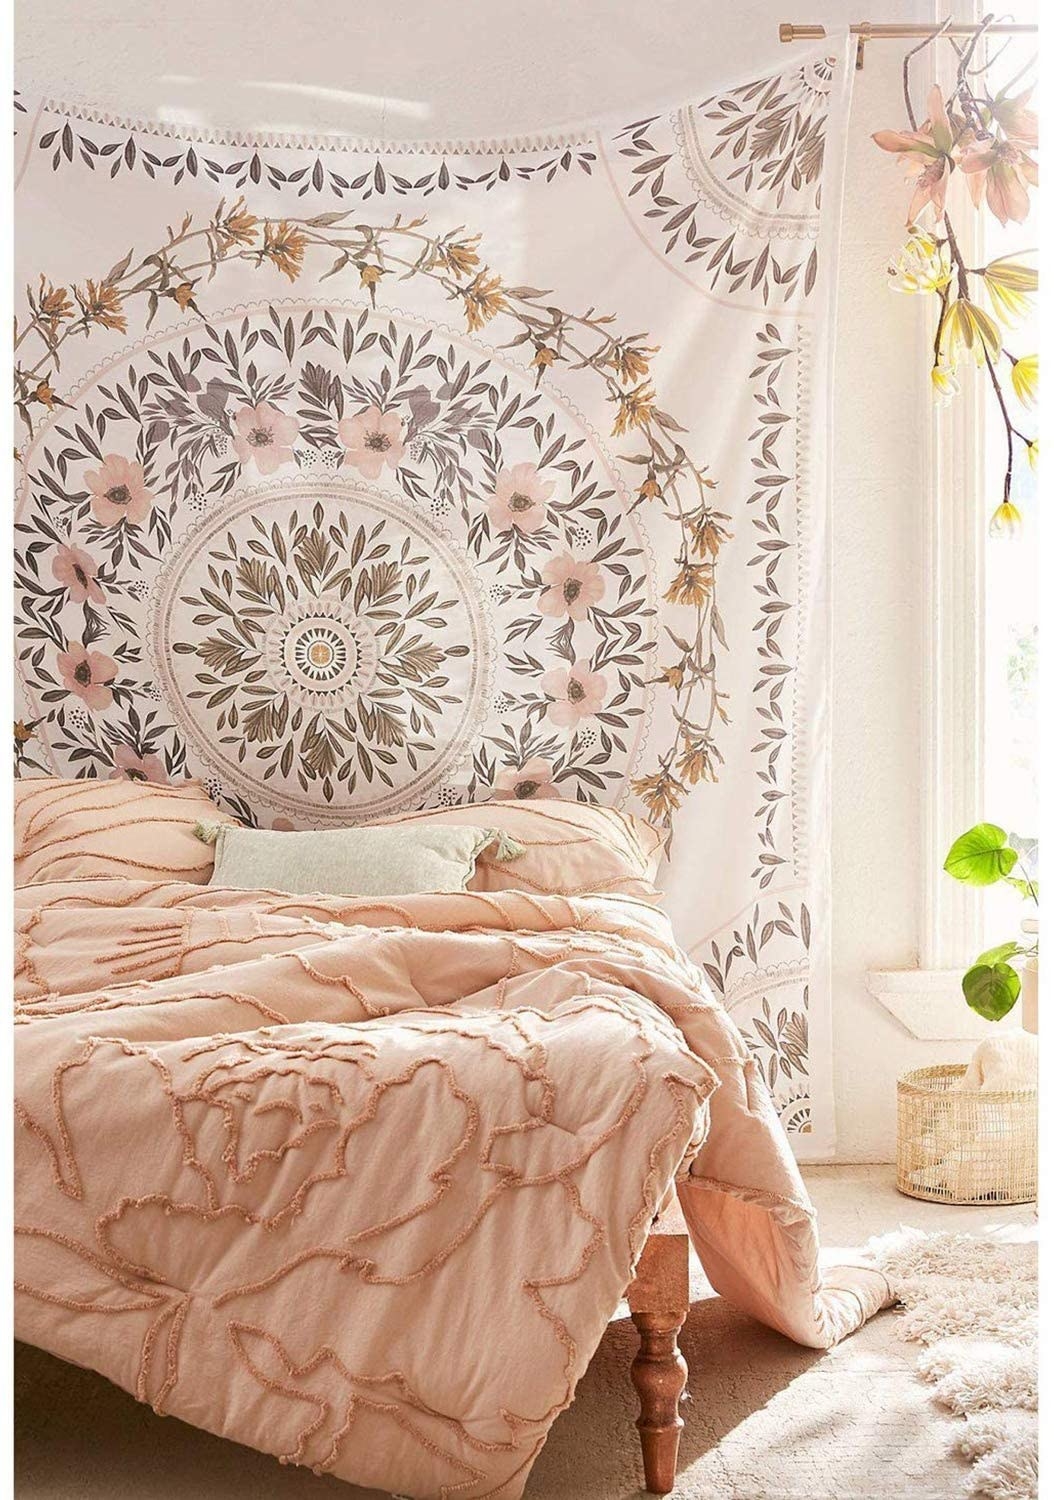 Large white tapestry with pink, green, and brown flowers in leaves in a circular pattern on the tapestry on a wall in a bedroom